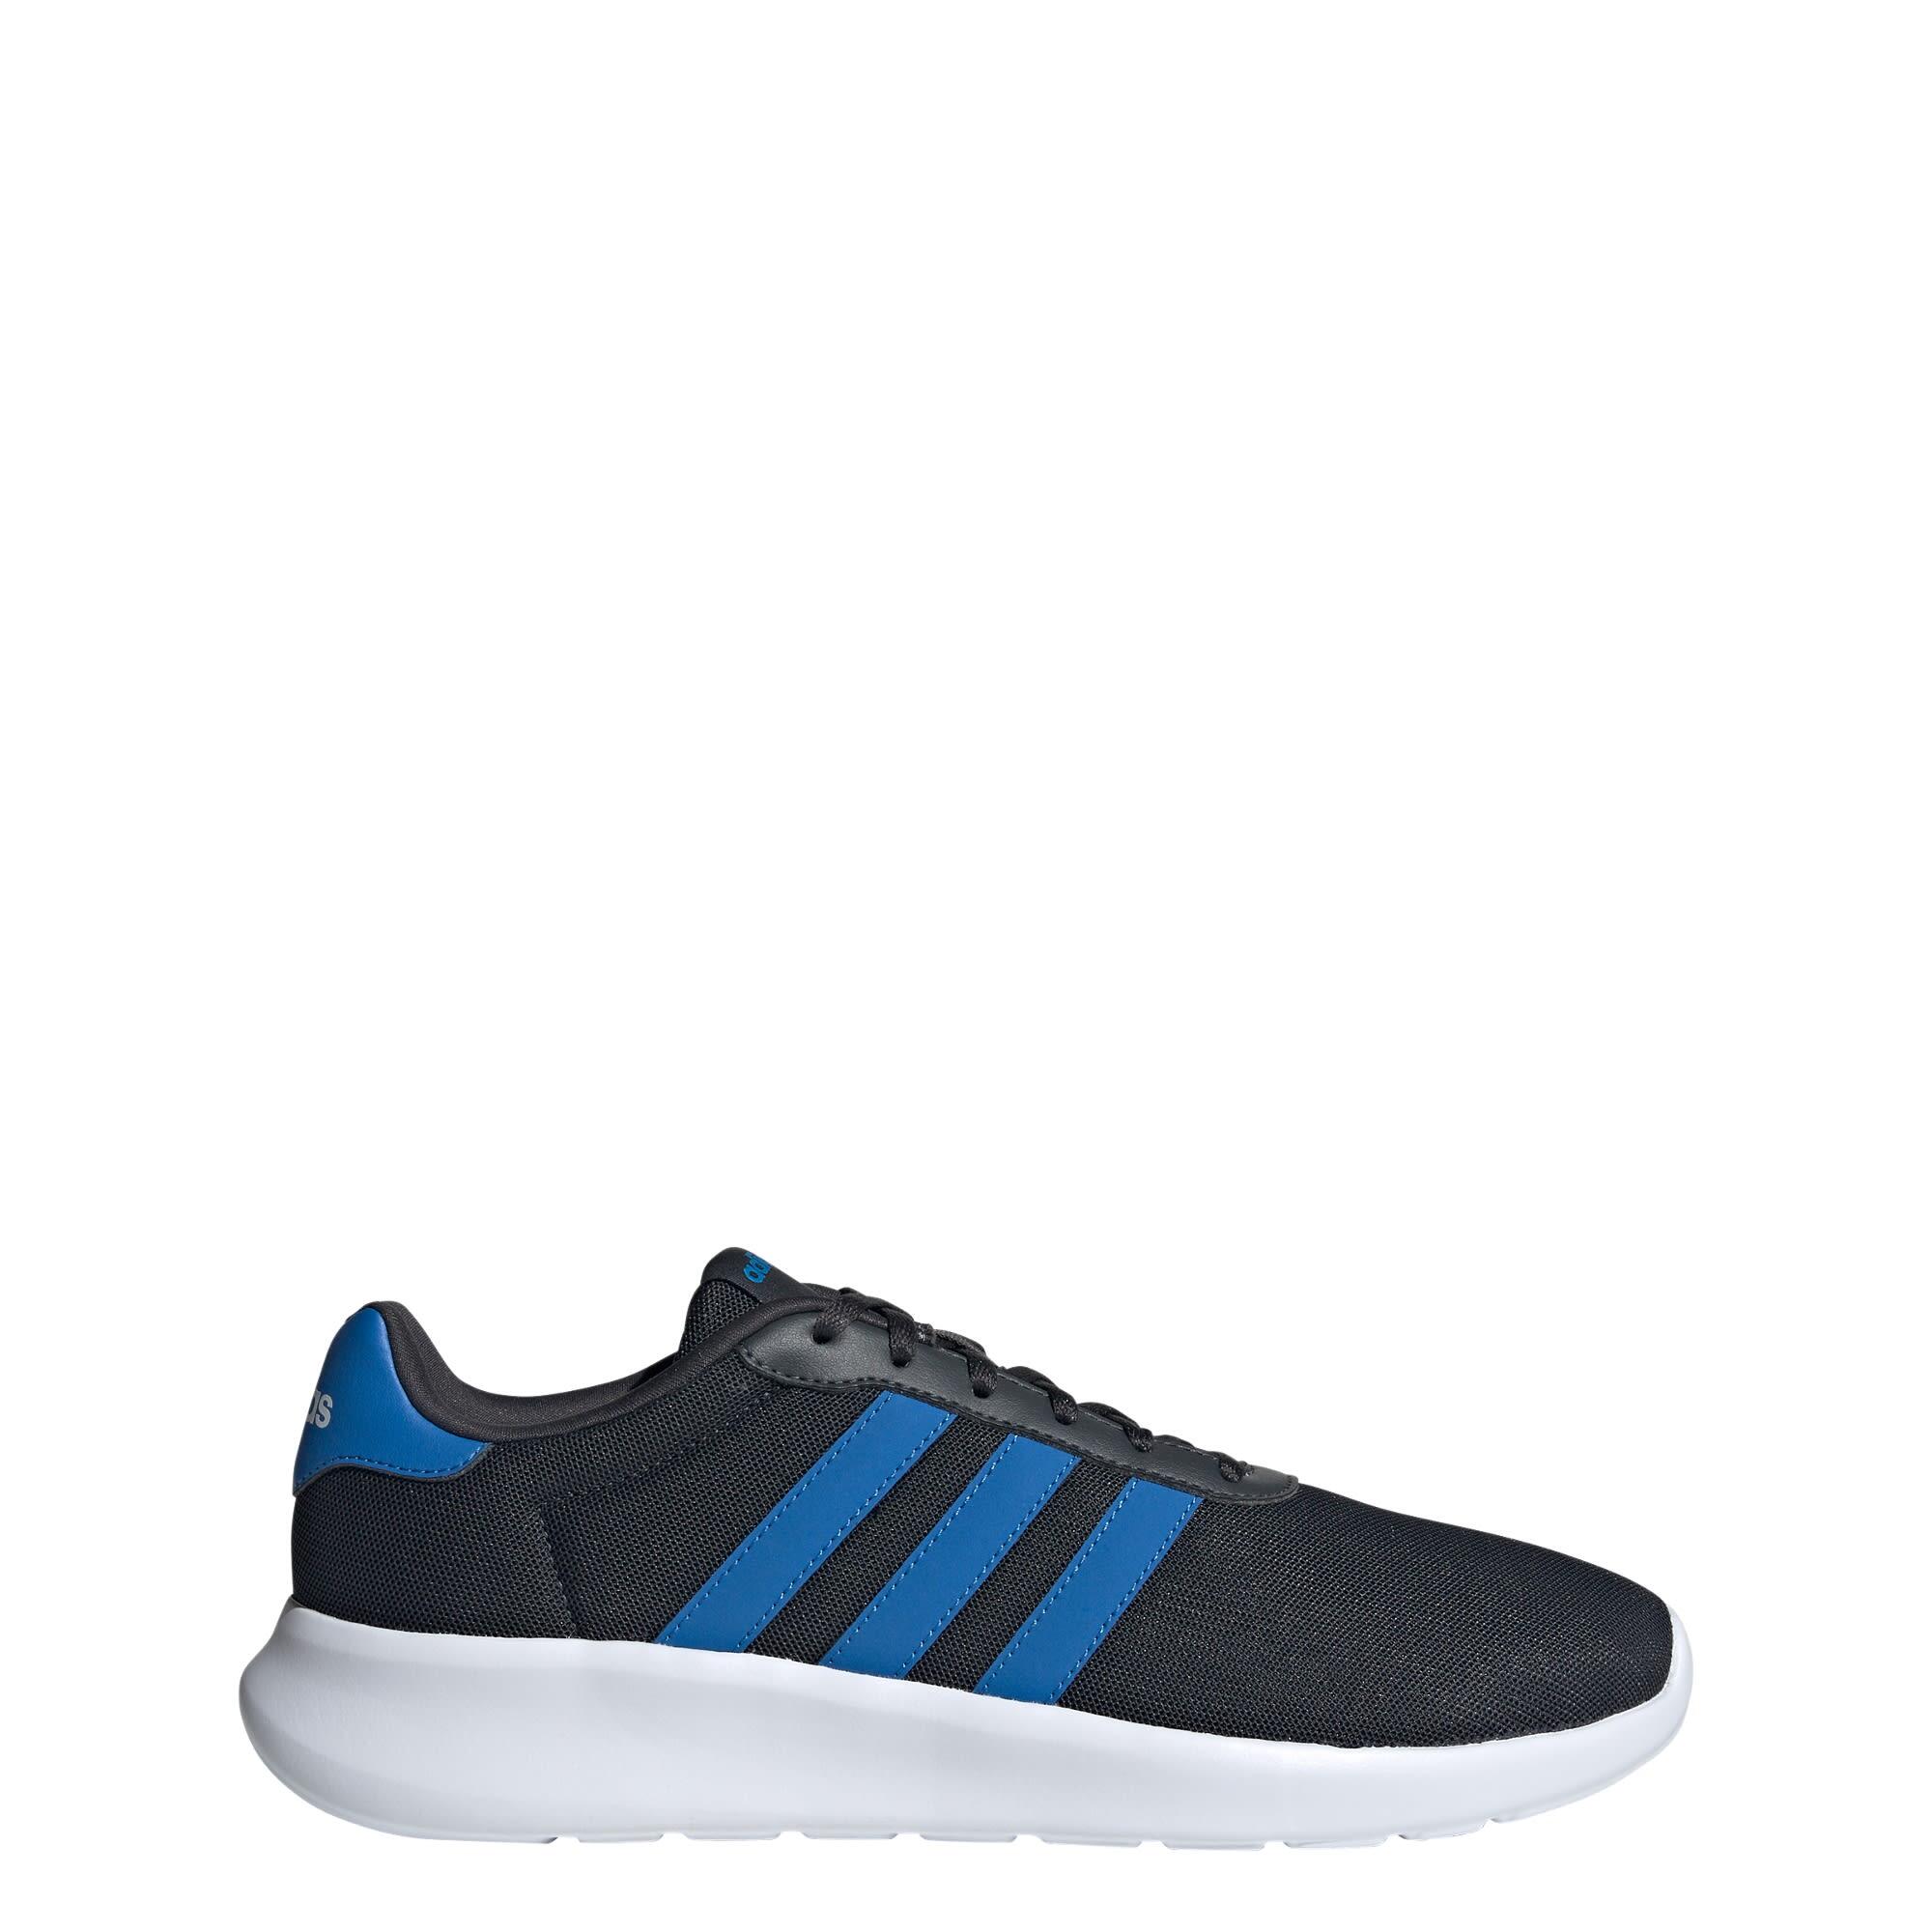 ADIDAS Lite Racer 3.0 Shoes